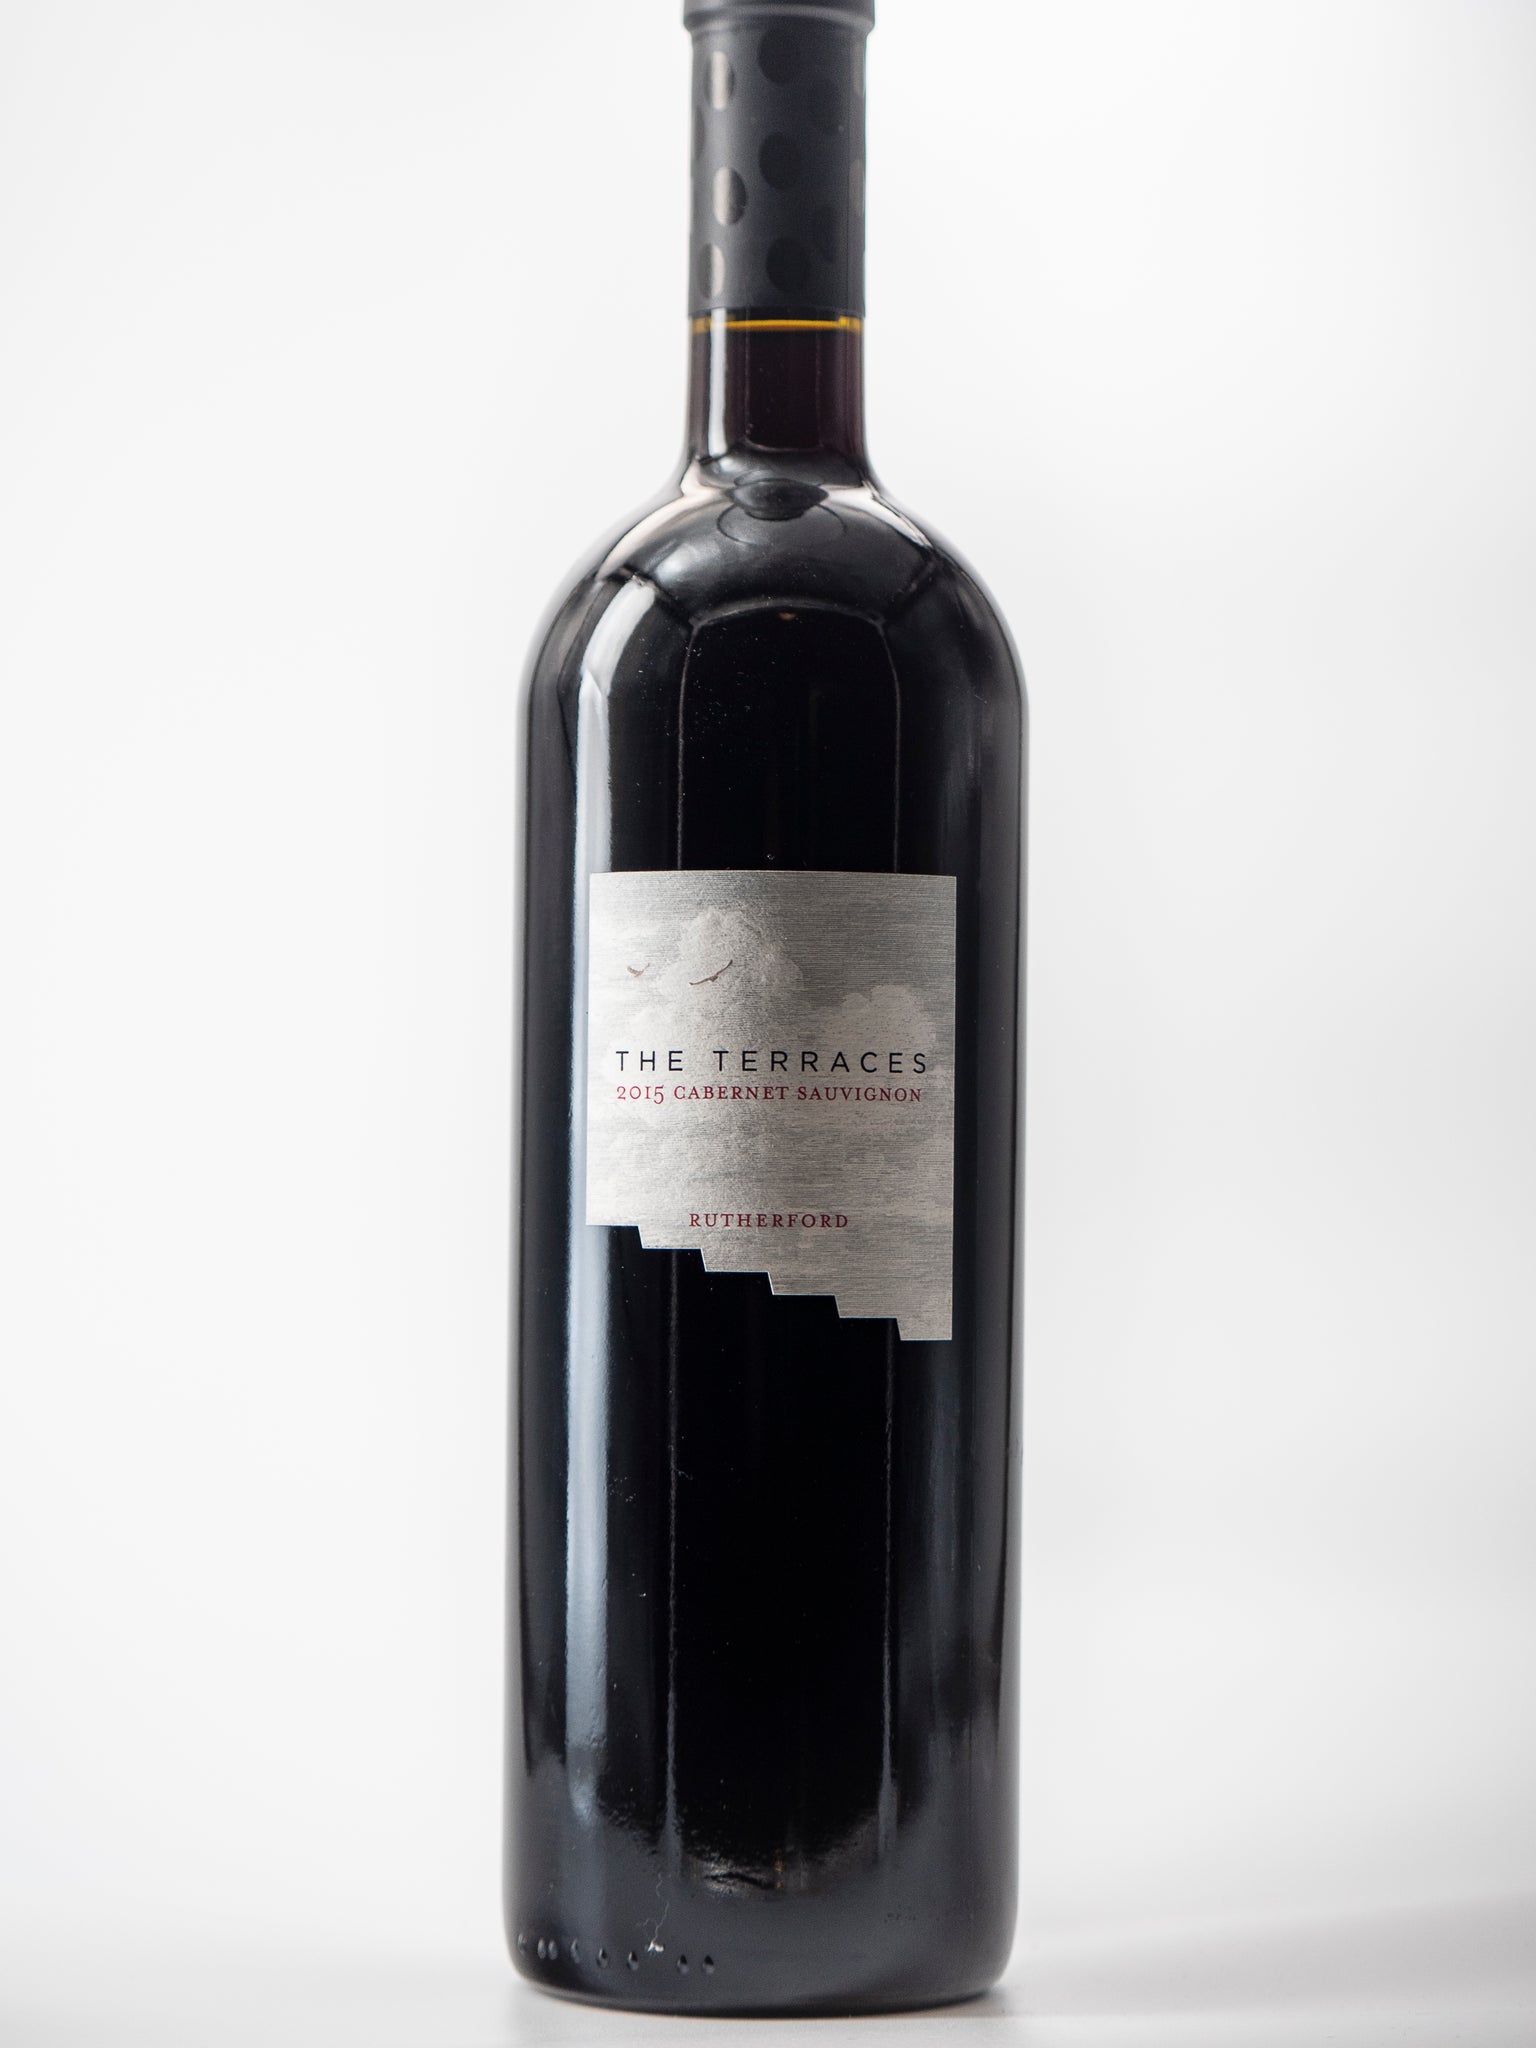 Cabernet Sauvignon, The Terraces, Rutherford